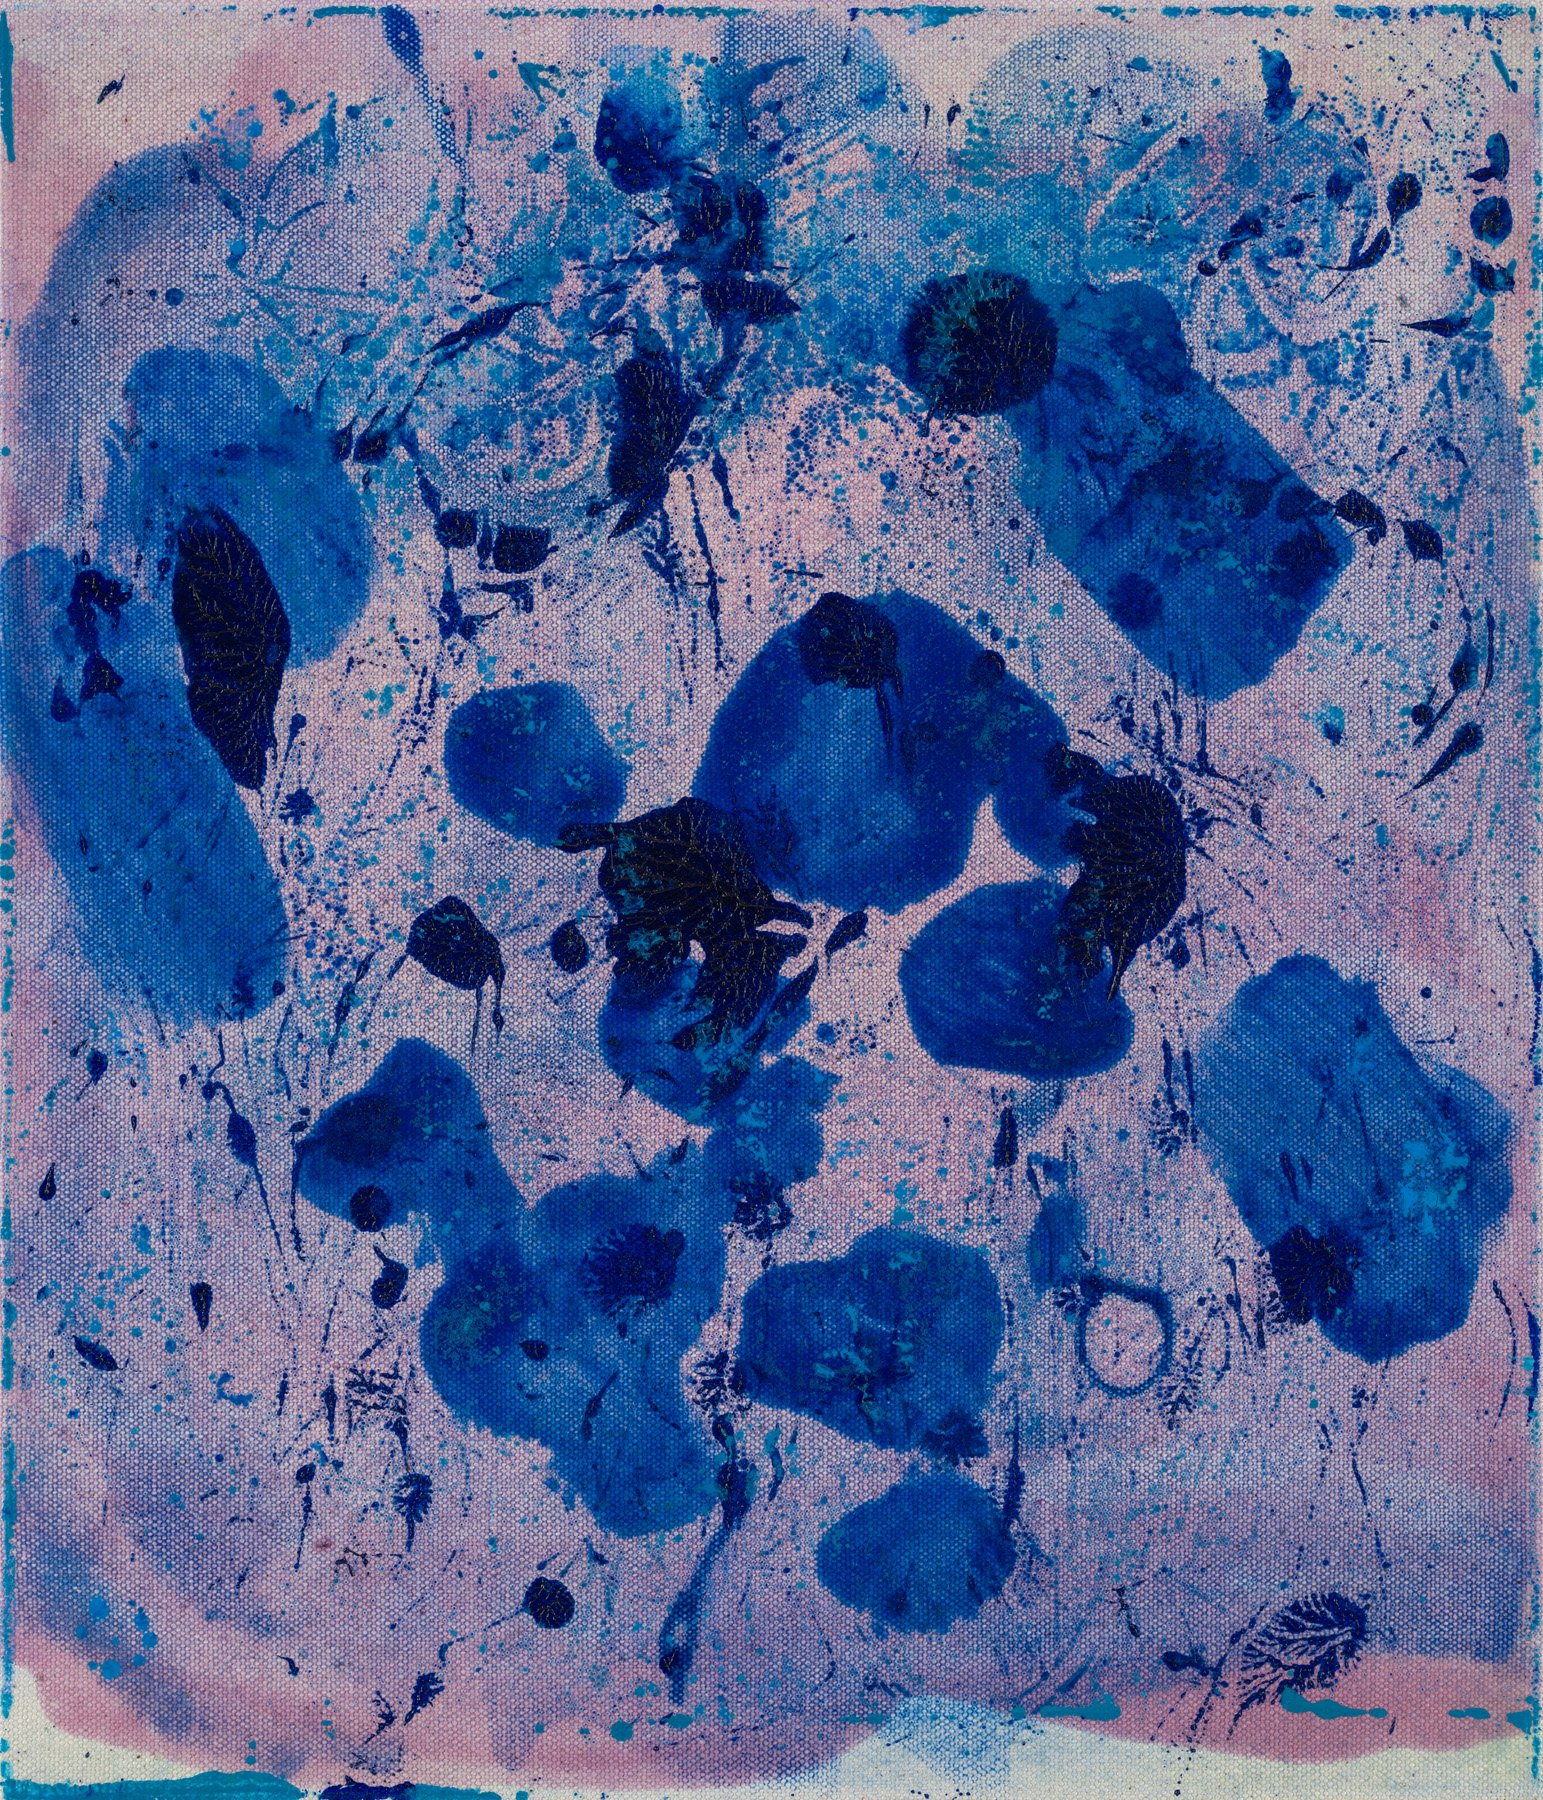  Blue collected IV  2021  Distemper and oil on canvas  35 x 30 cm 